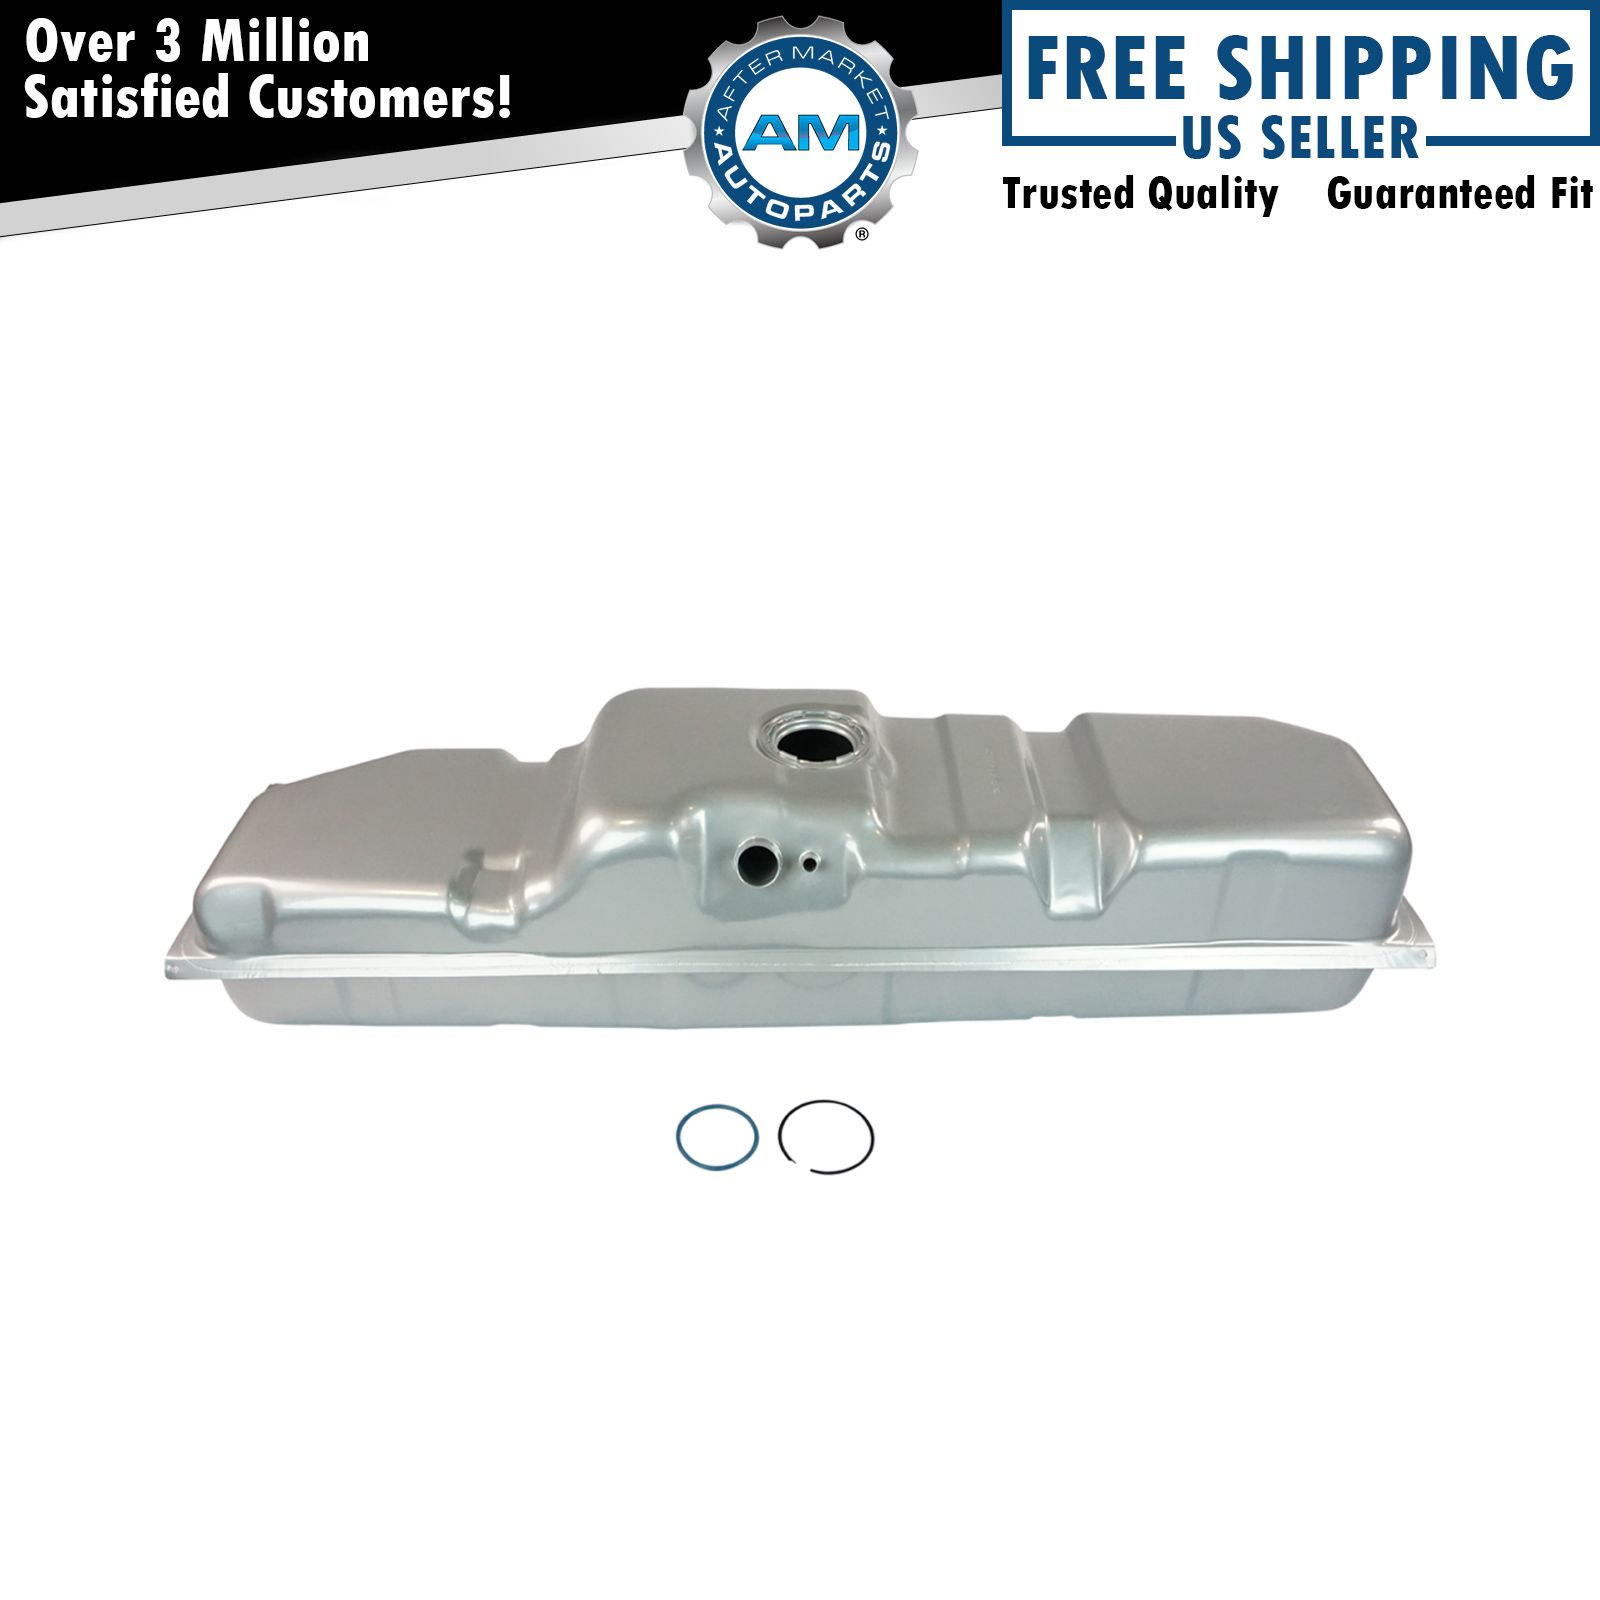 34 Gallon Gas Fuel Tank for 15017934 Chevy GMC C K 2500 1500 Pickup Truck